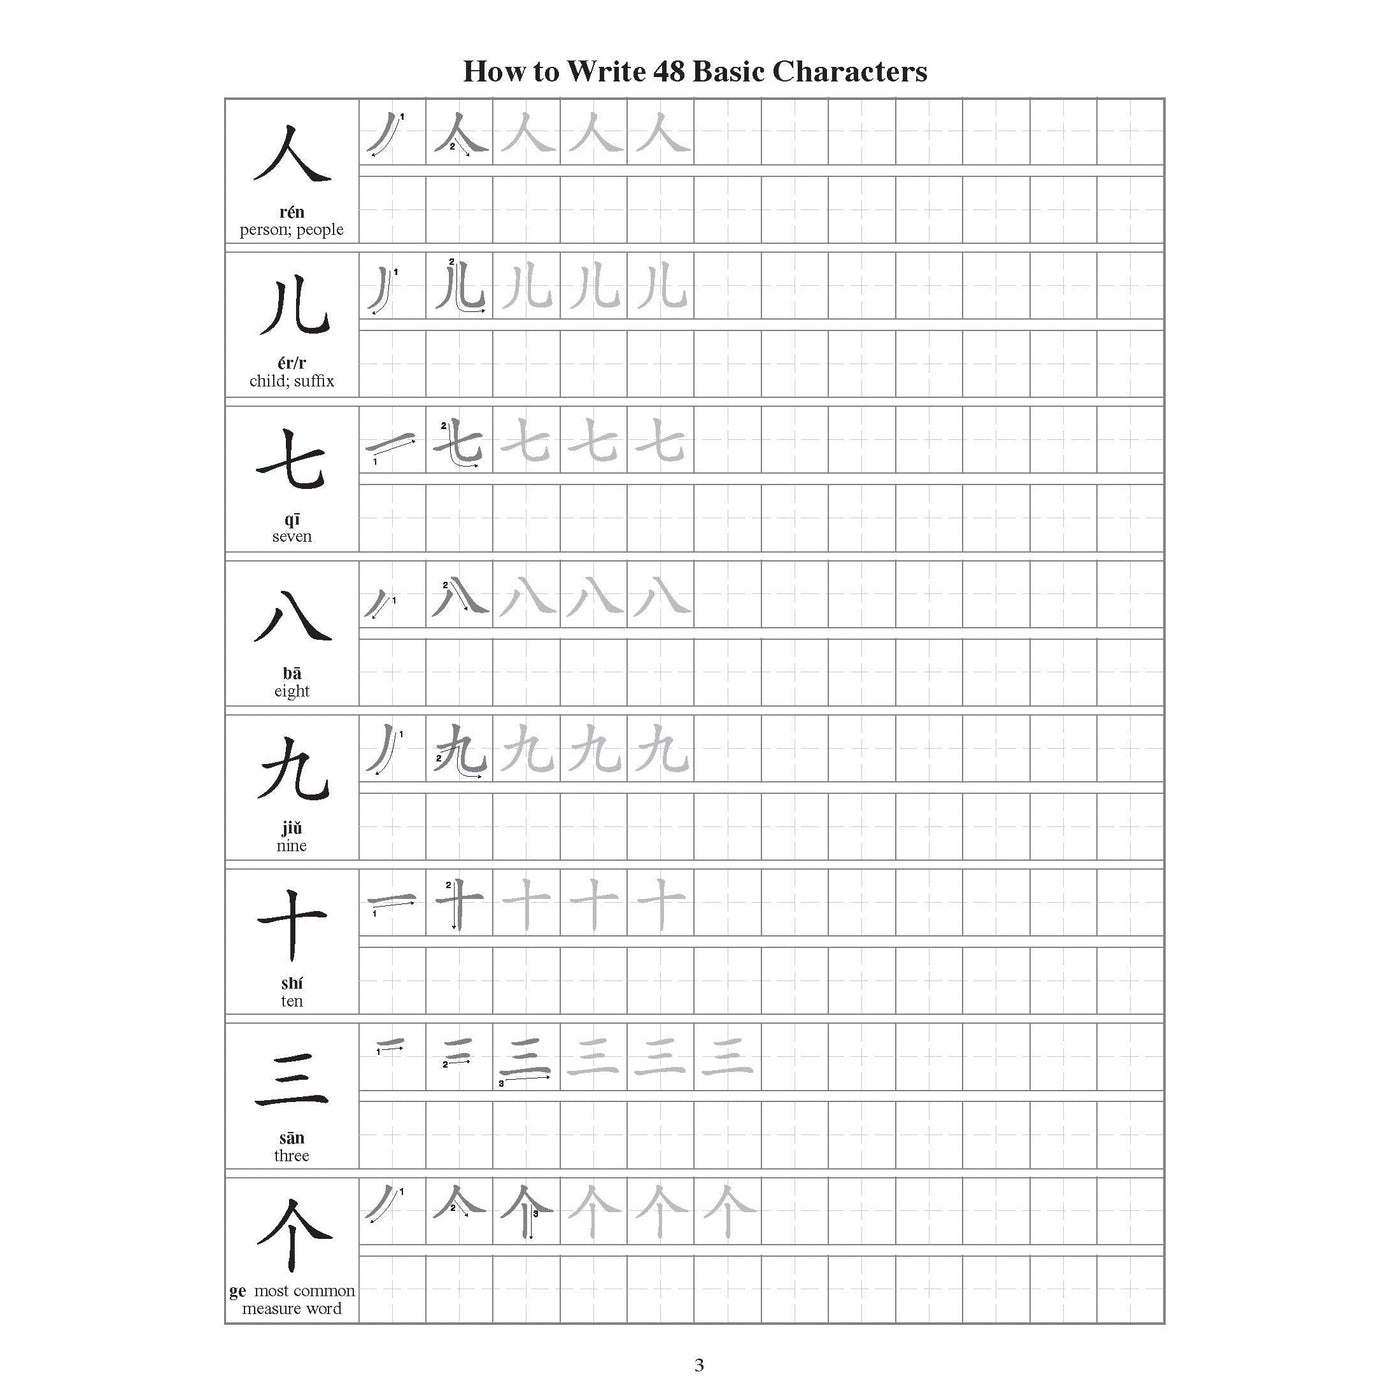 Mandarin Chinese Writing Practice Book: Learn to Write Chinese Characters Correctly (Character Handwriting Sheets with Square Grids)